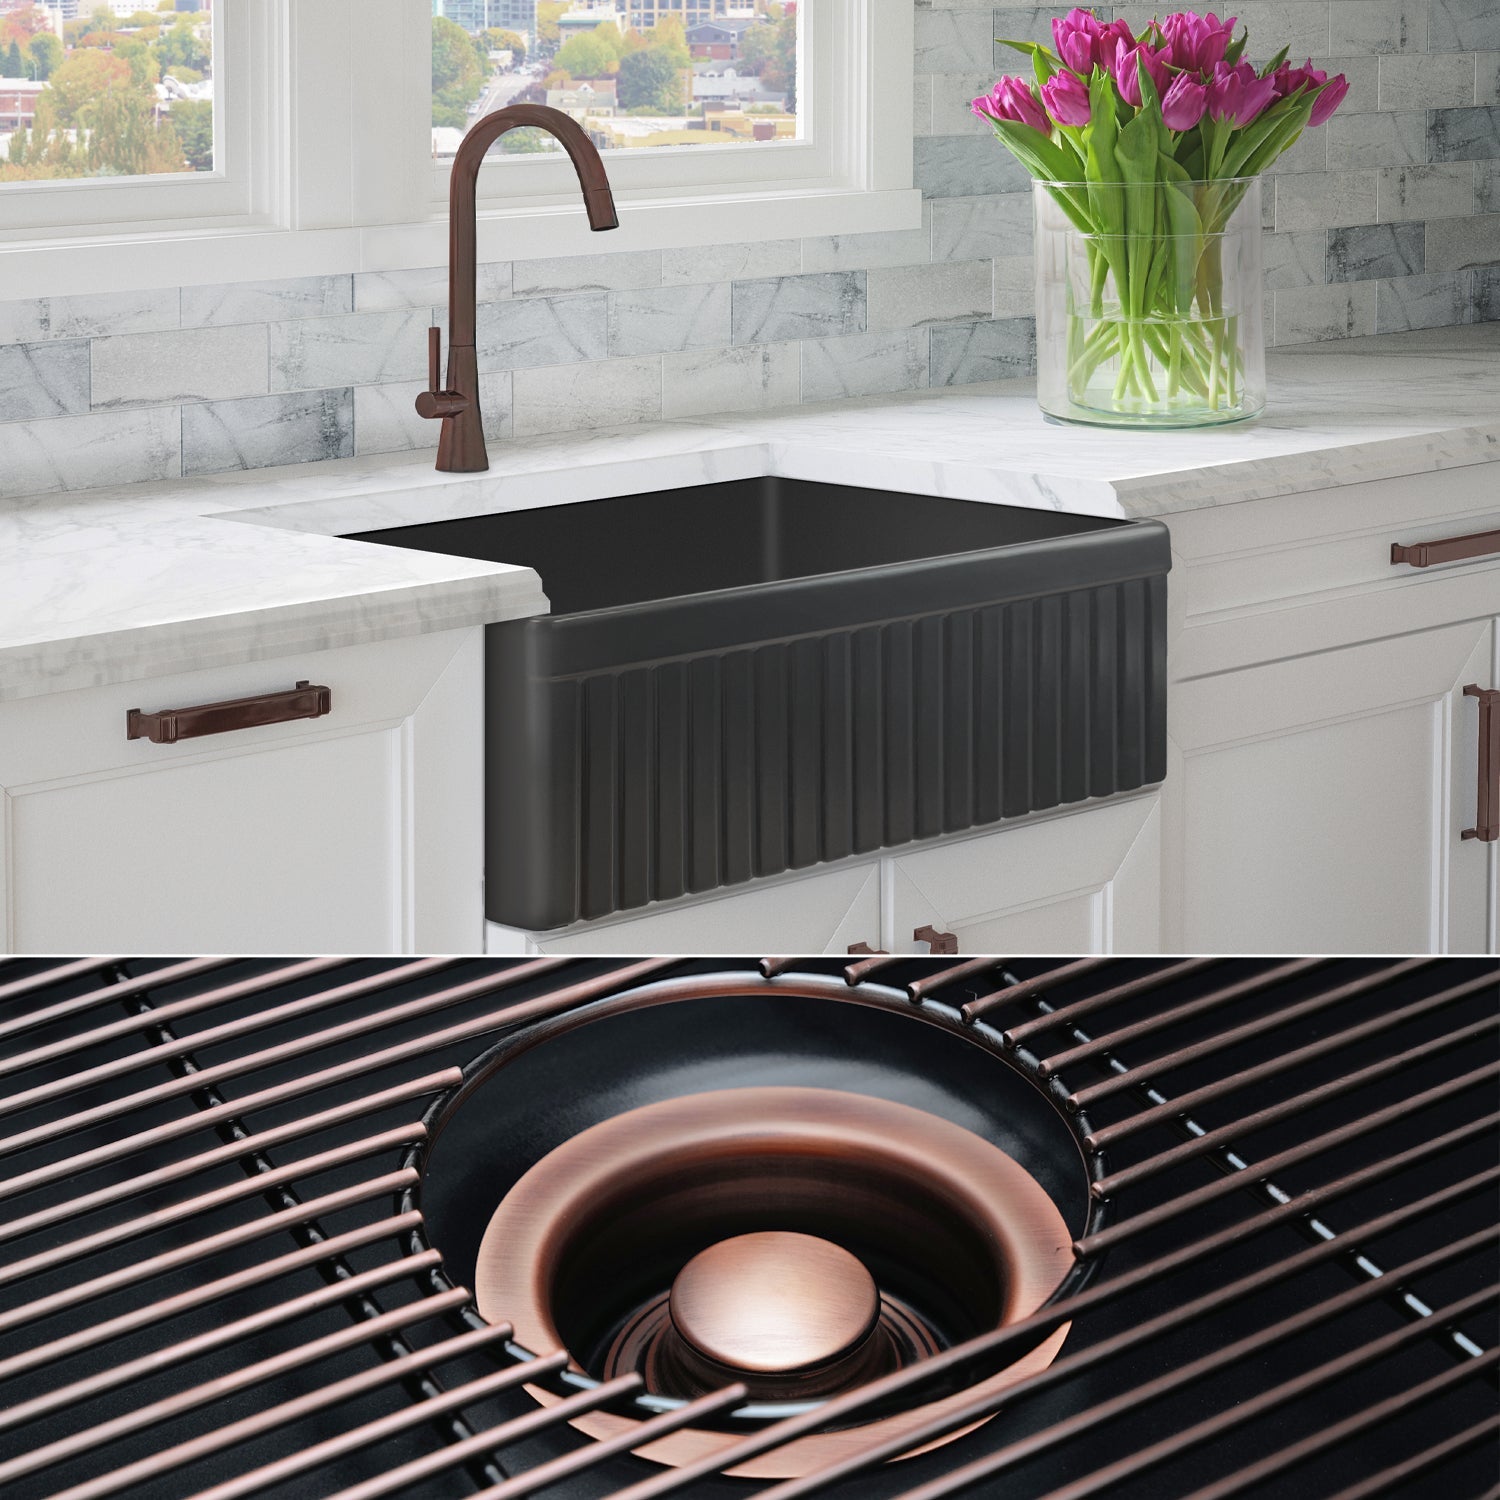 FSW1027AC LUX 33-INCH SOLID FIRECLAY FARMHOUSE SINK, MATTE BLACK, ANTIQUE COPPER ACCS, FLUTED FRONT